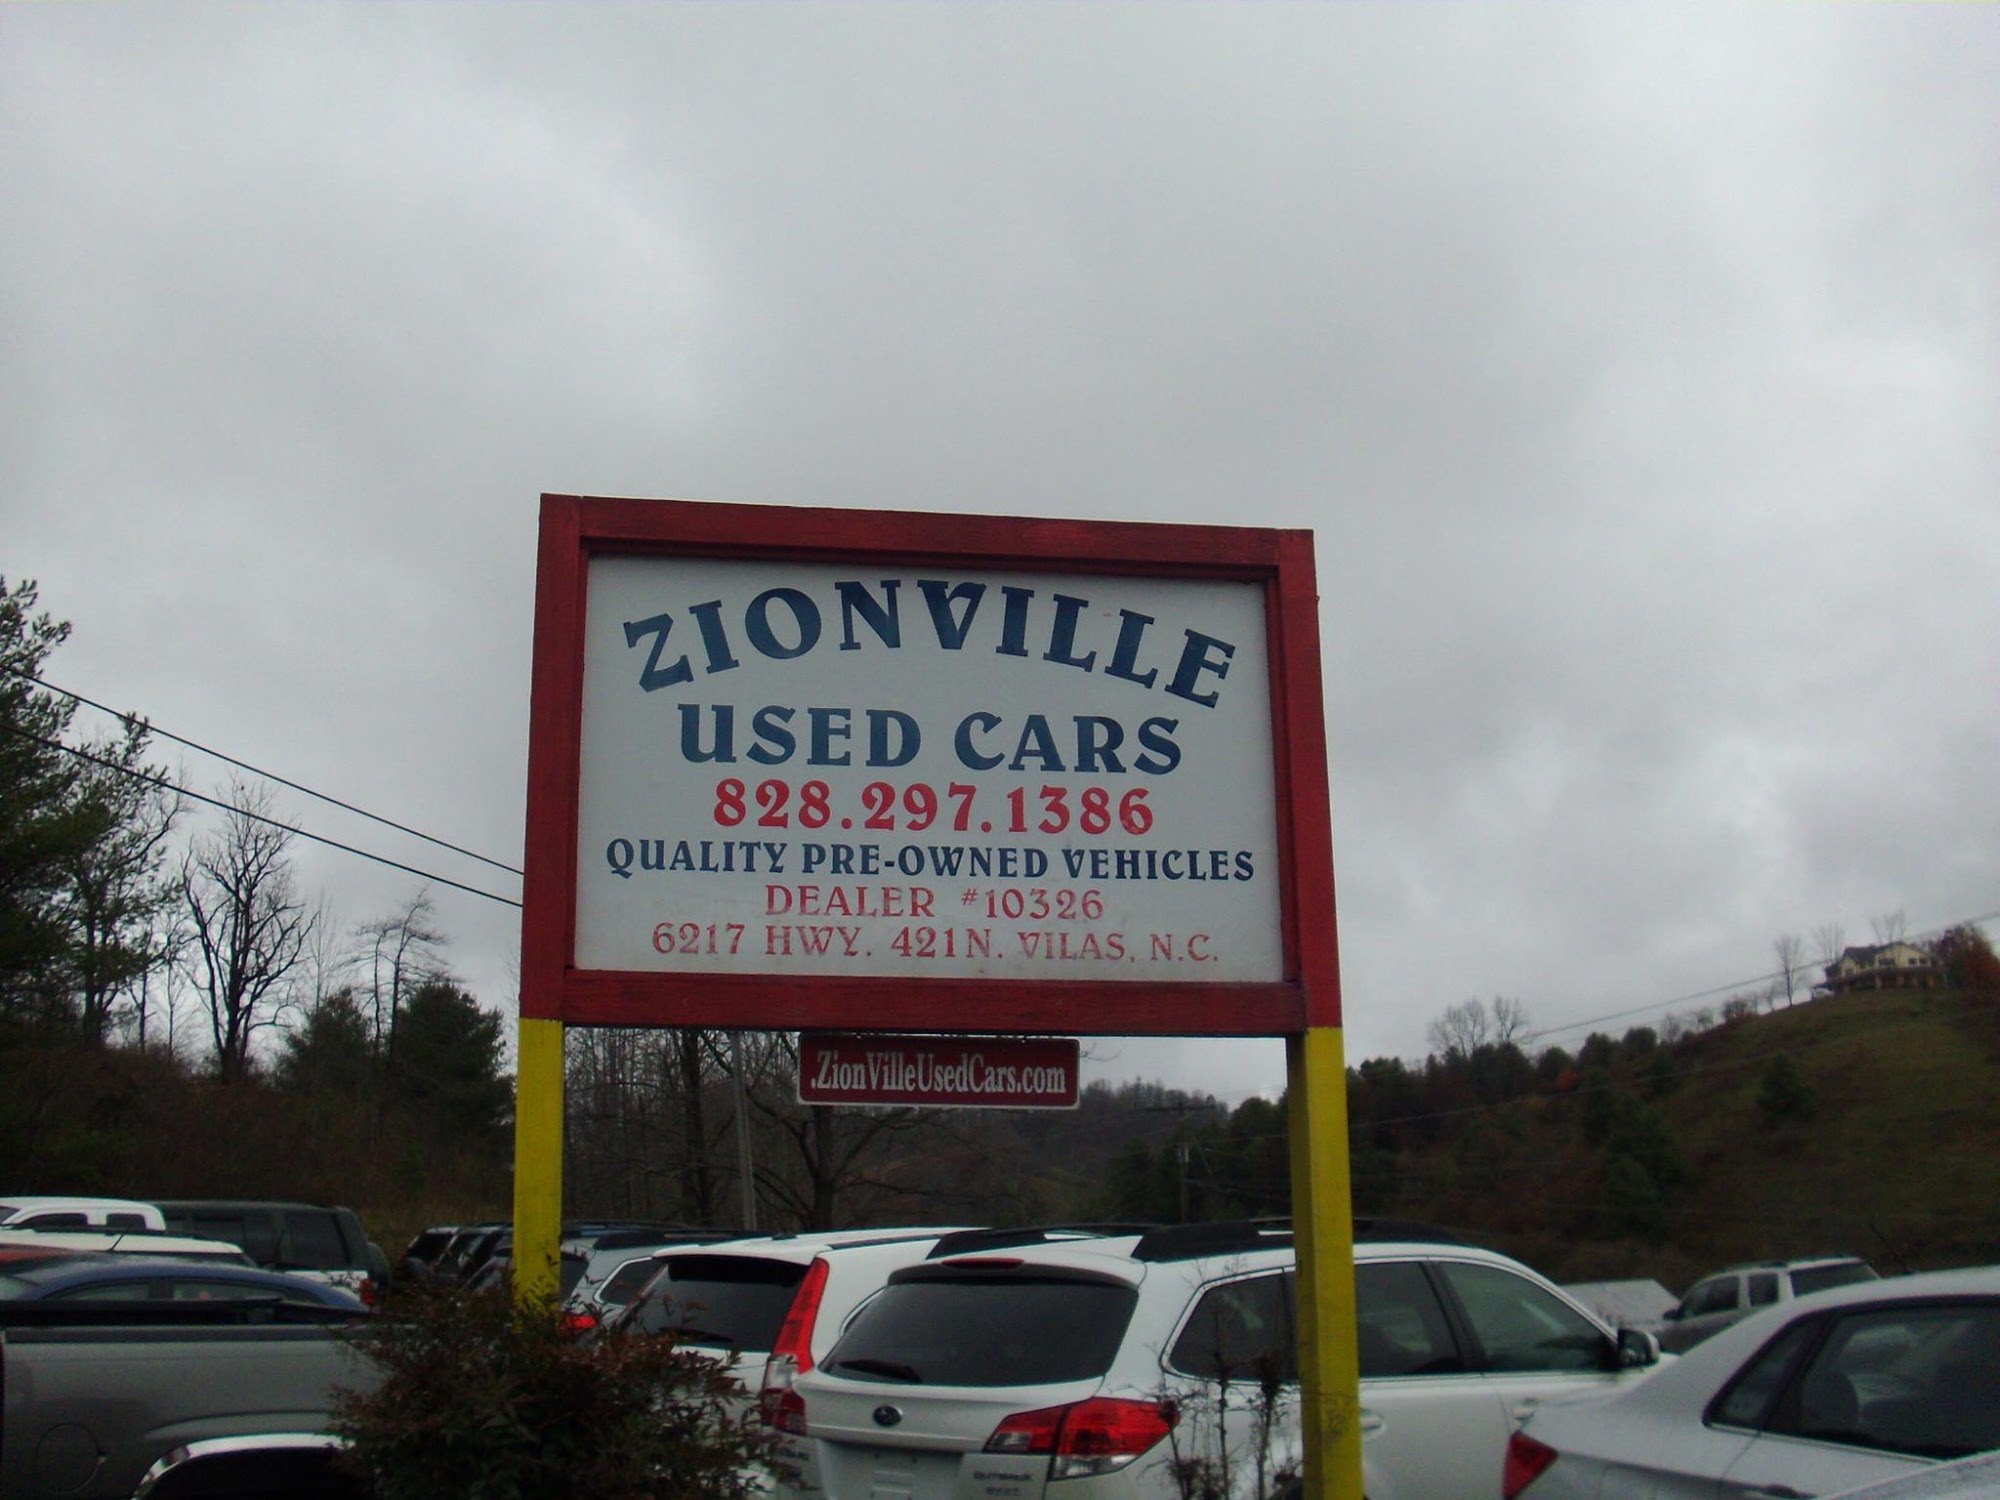 Zionville Used Cars